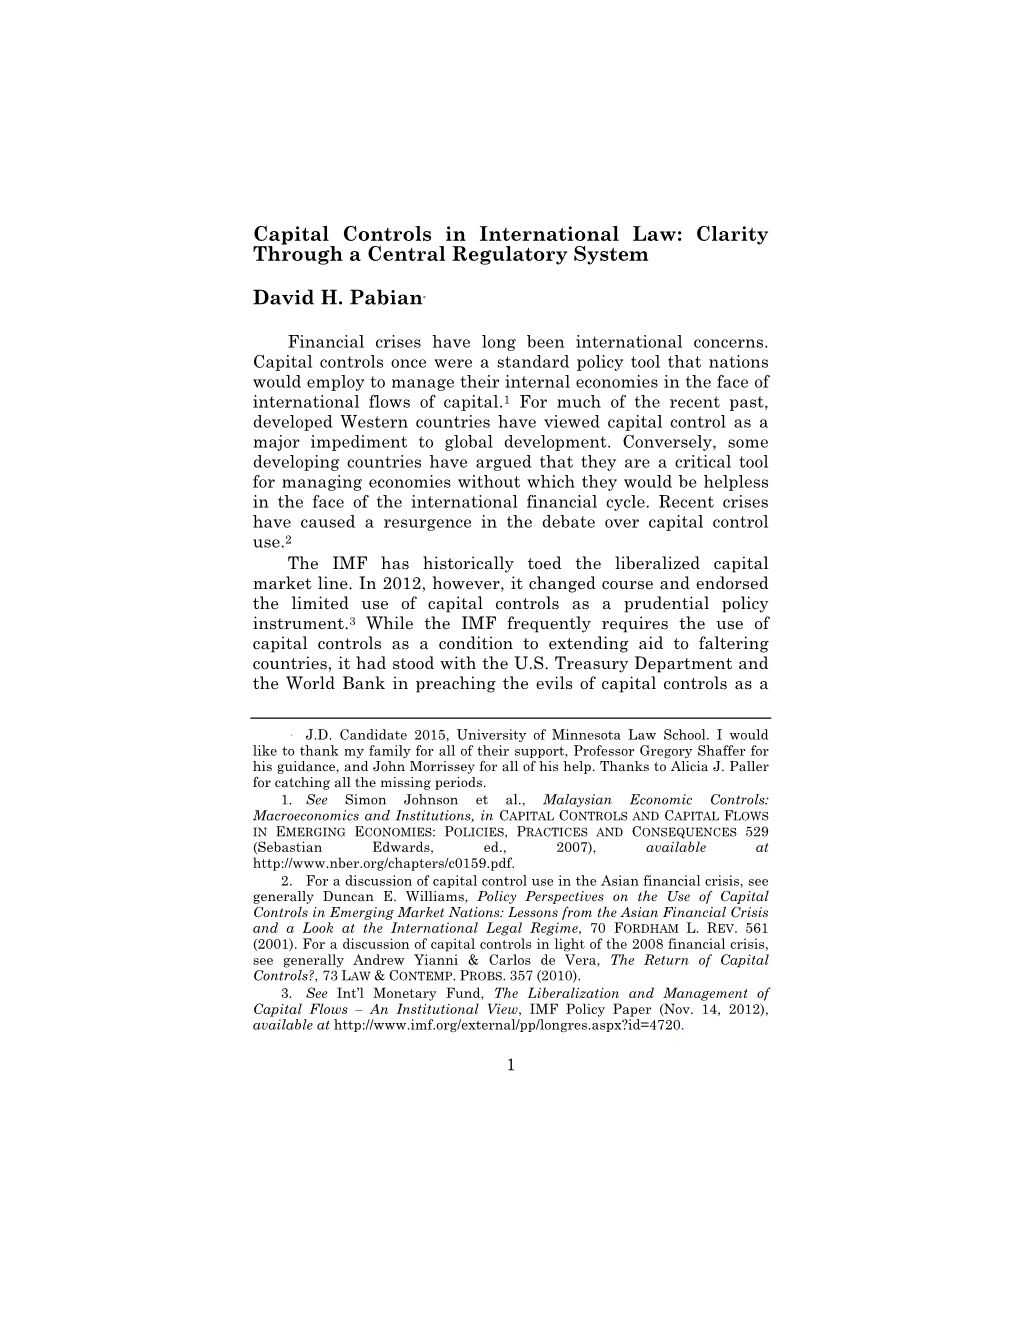 Capital Controls in International Law: Clarity Through a Central Regulatory System